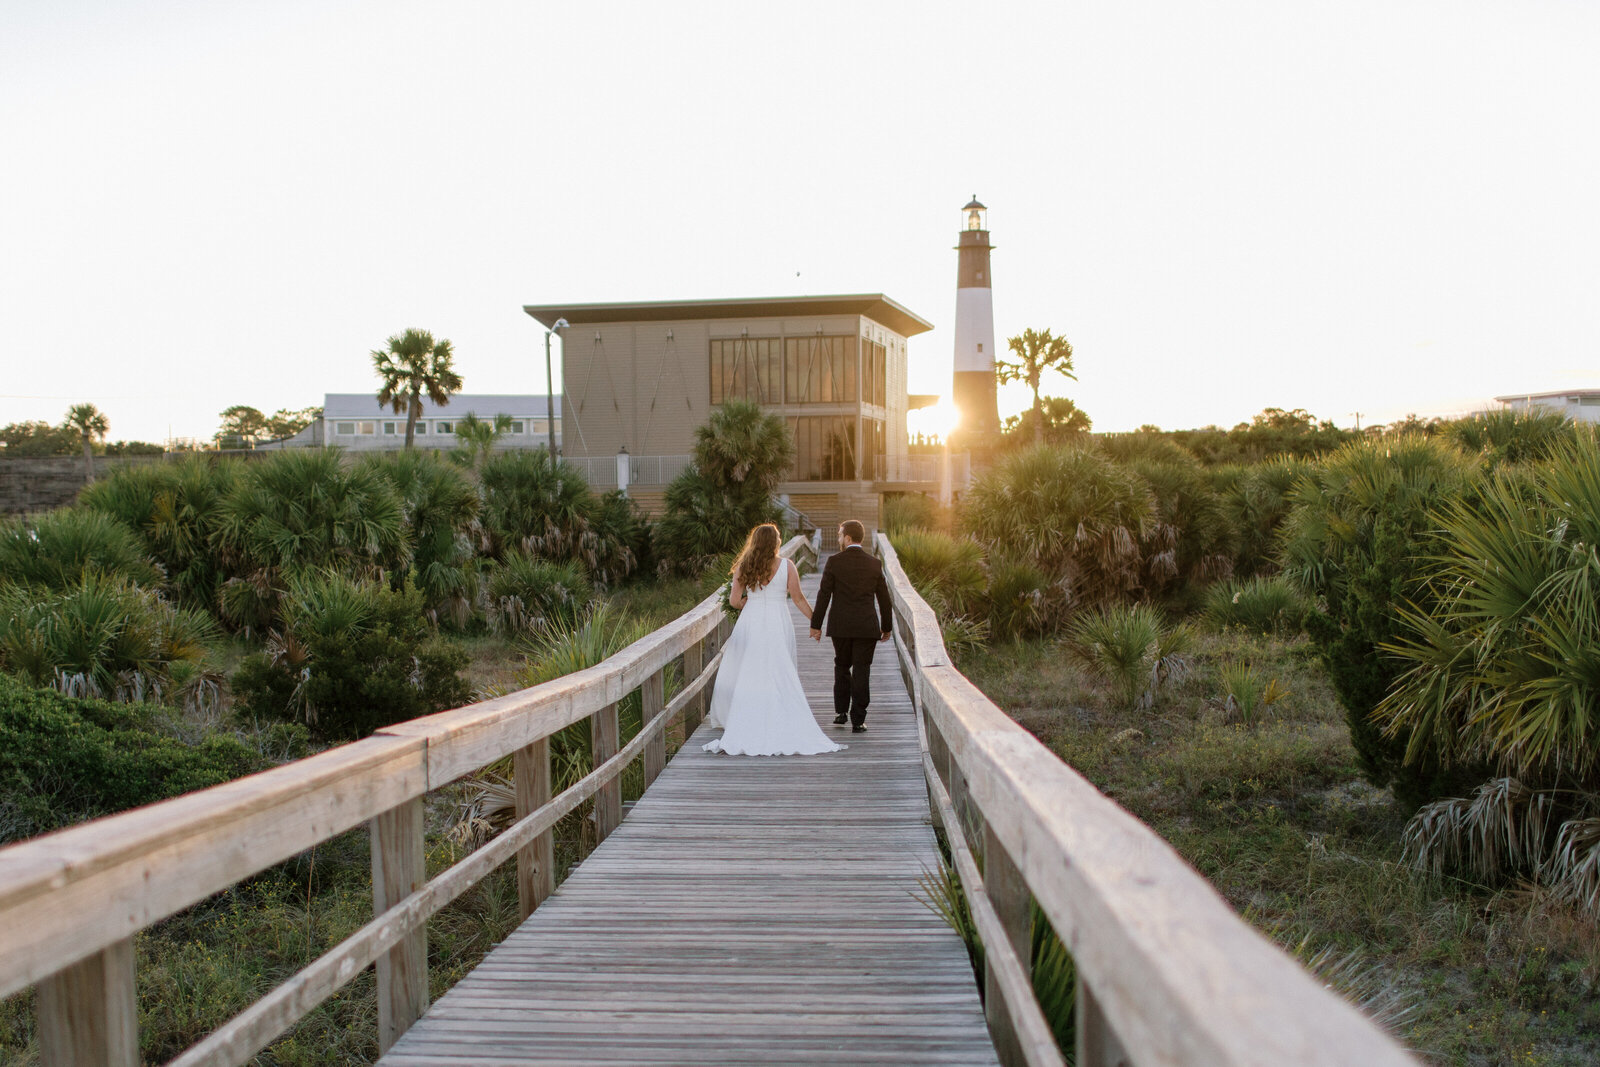 Wedding photography in savannah, ga of bride and groom walking away from camera down beach board walk holding hands at sunset toward a lighthouse with sunset peaking around the side.